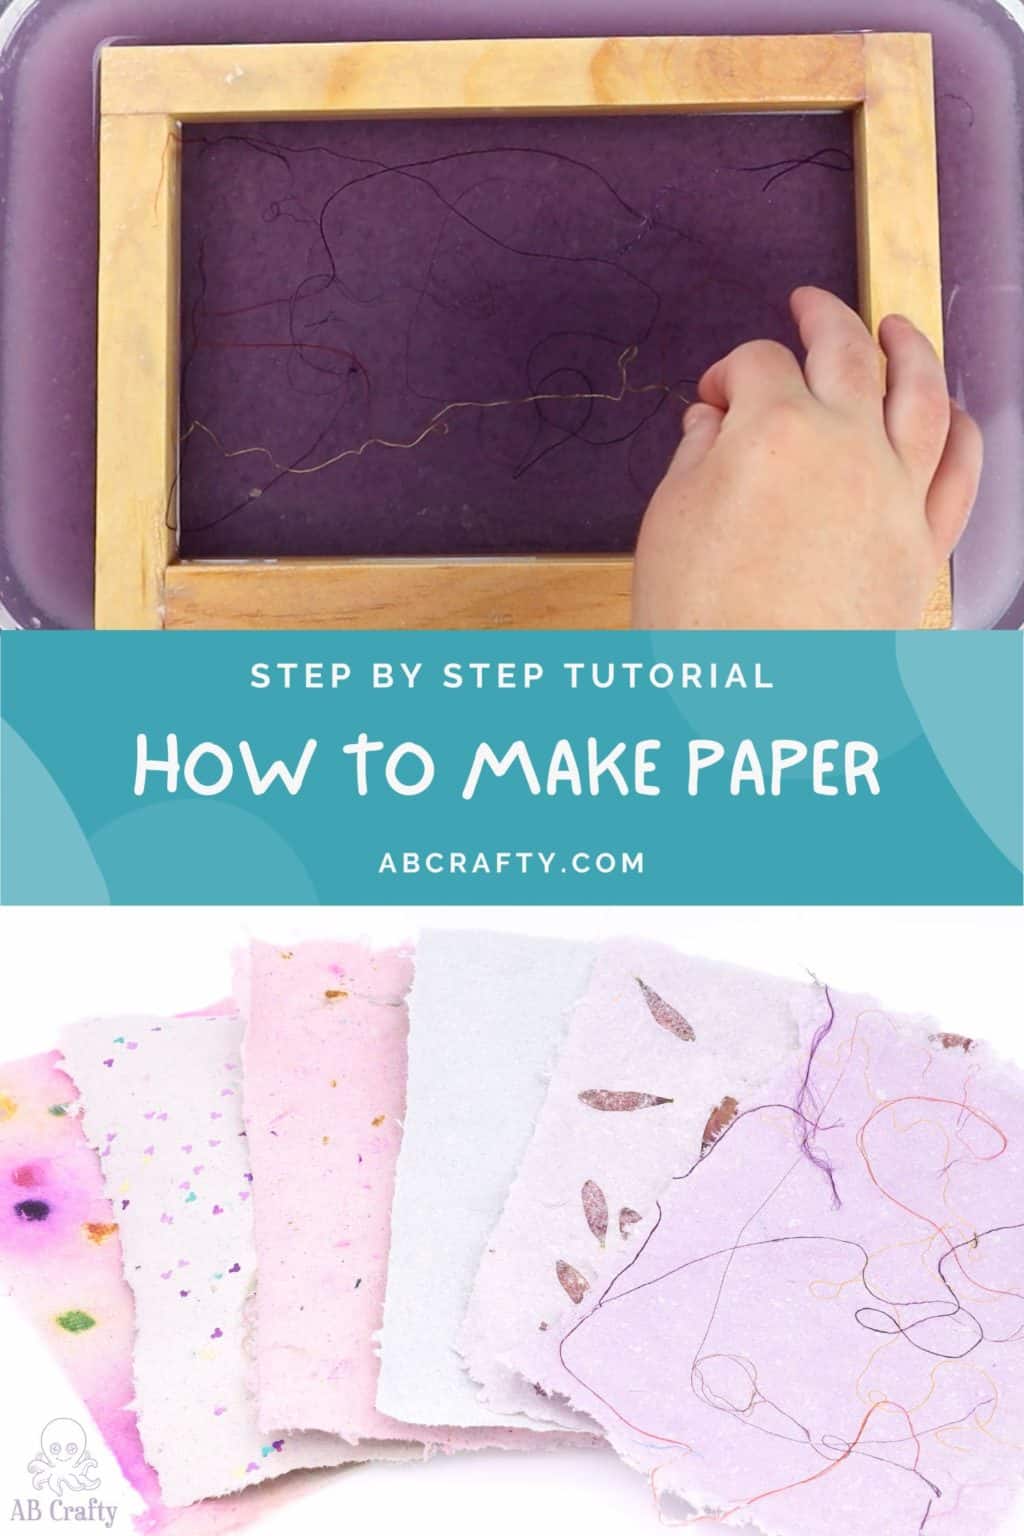 showing the process of paper making and the finished homemade paper in different colors and with different embellishments with the title 'step by step tutorial - how to make paper, abcrafty.com'